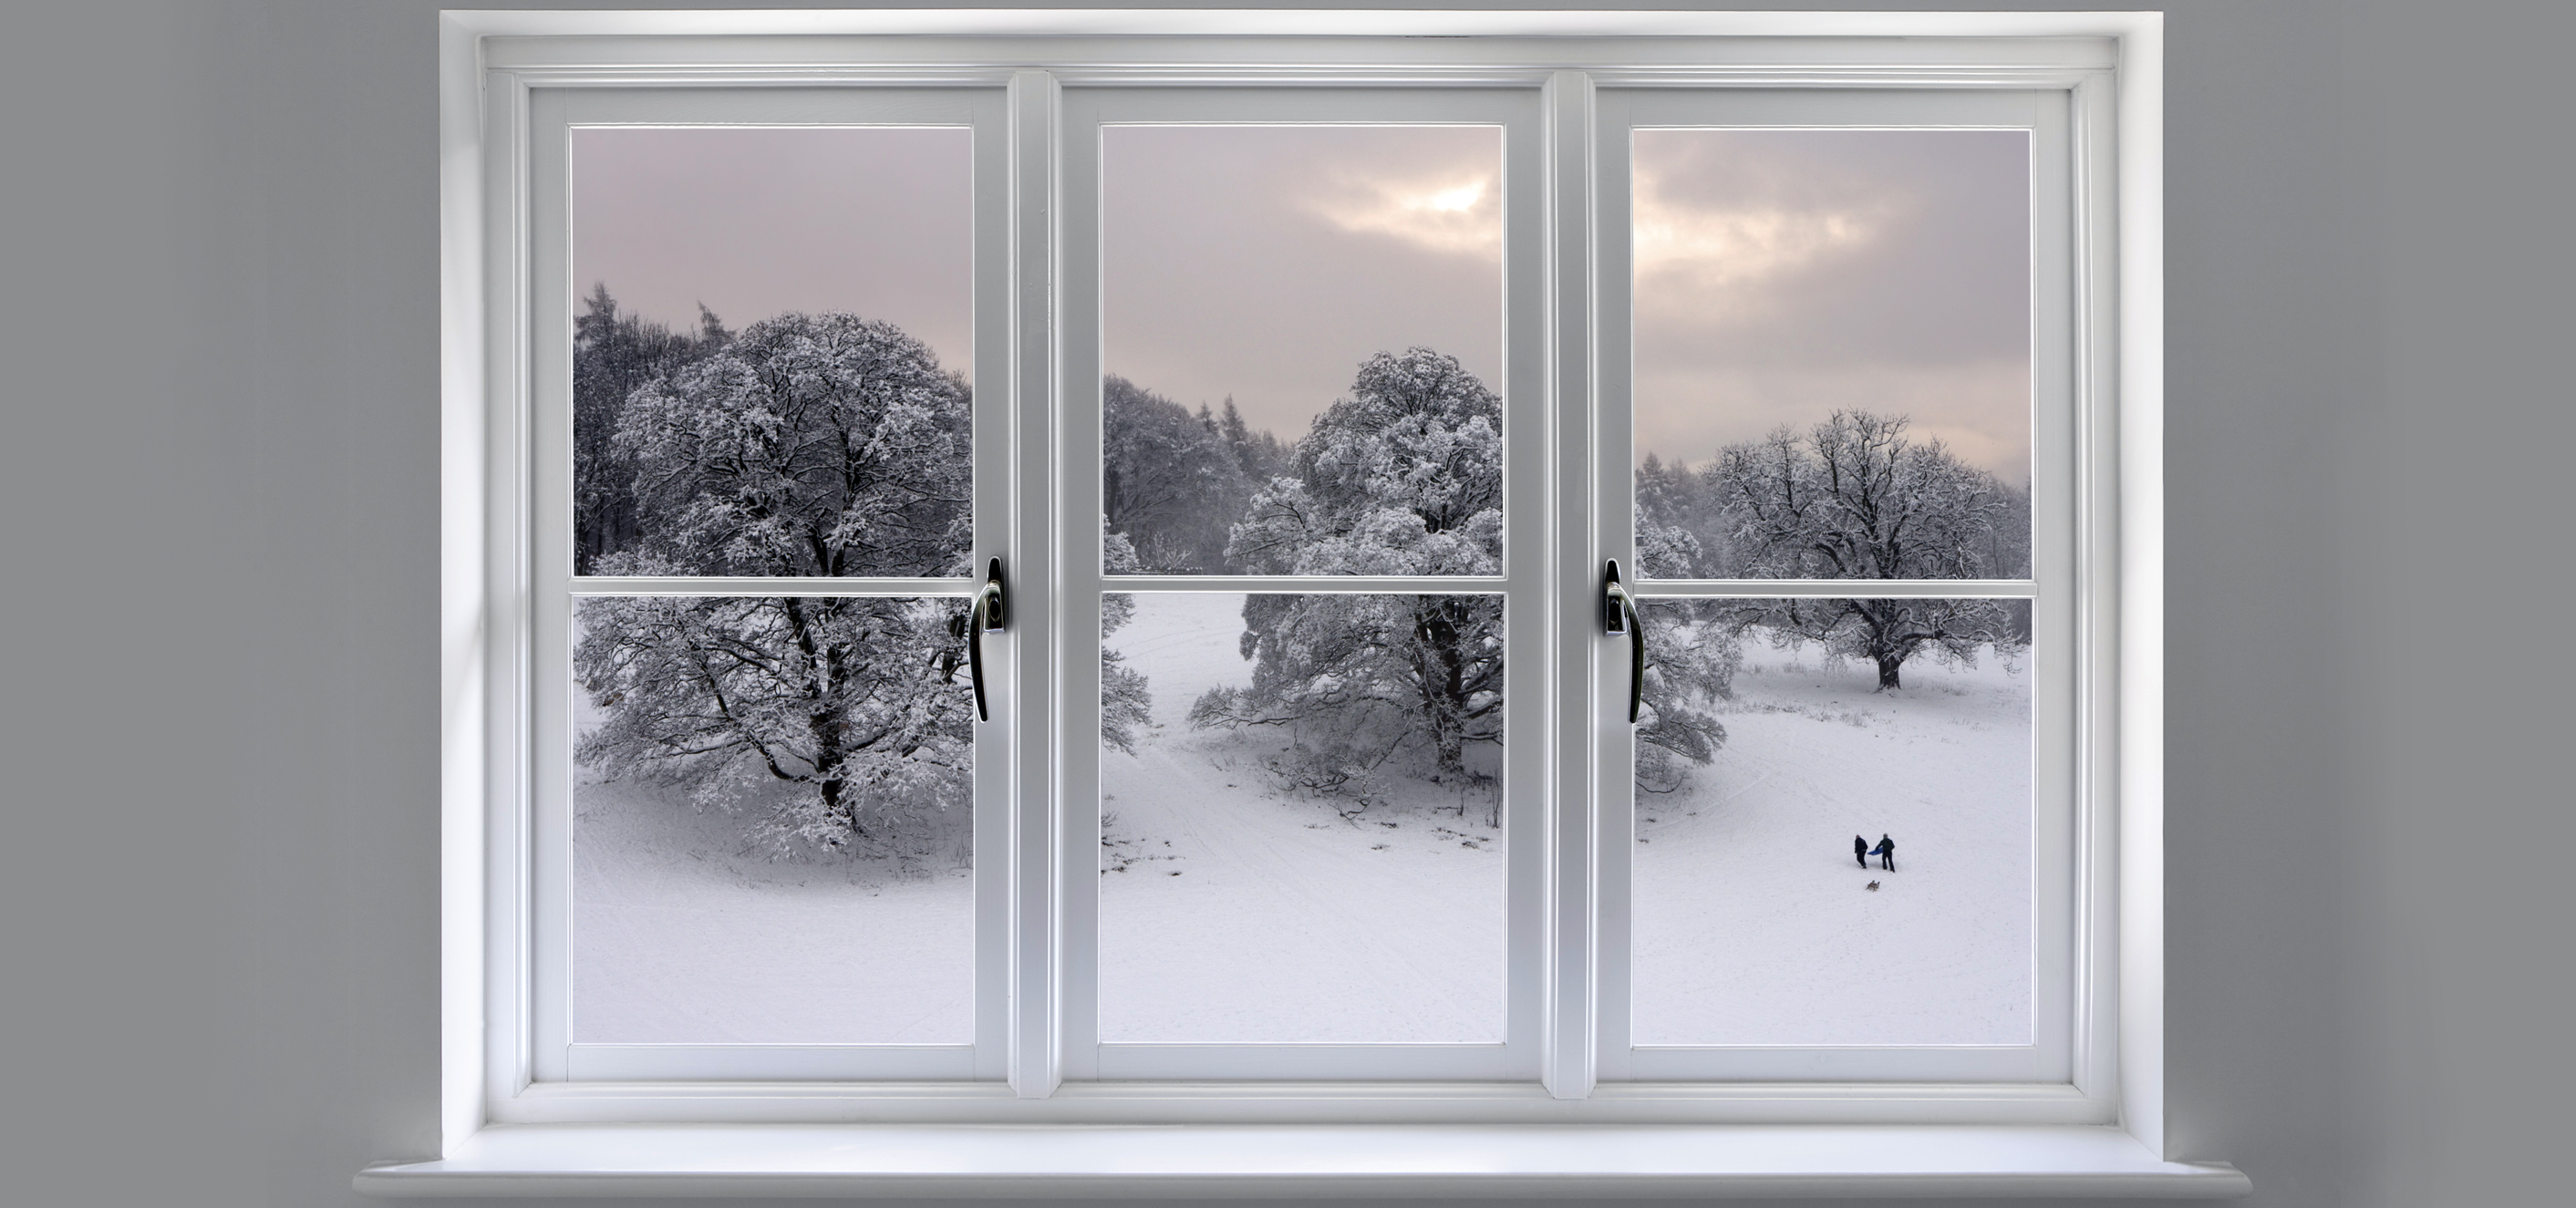 Windows with handles looking upon a winter scene.